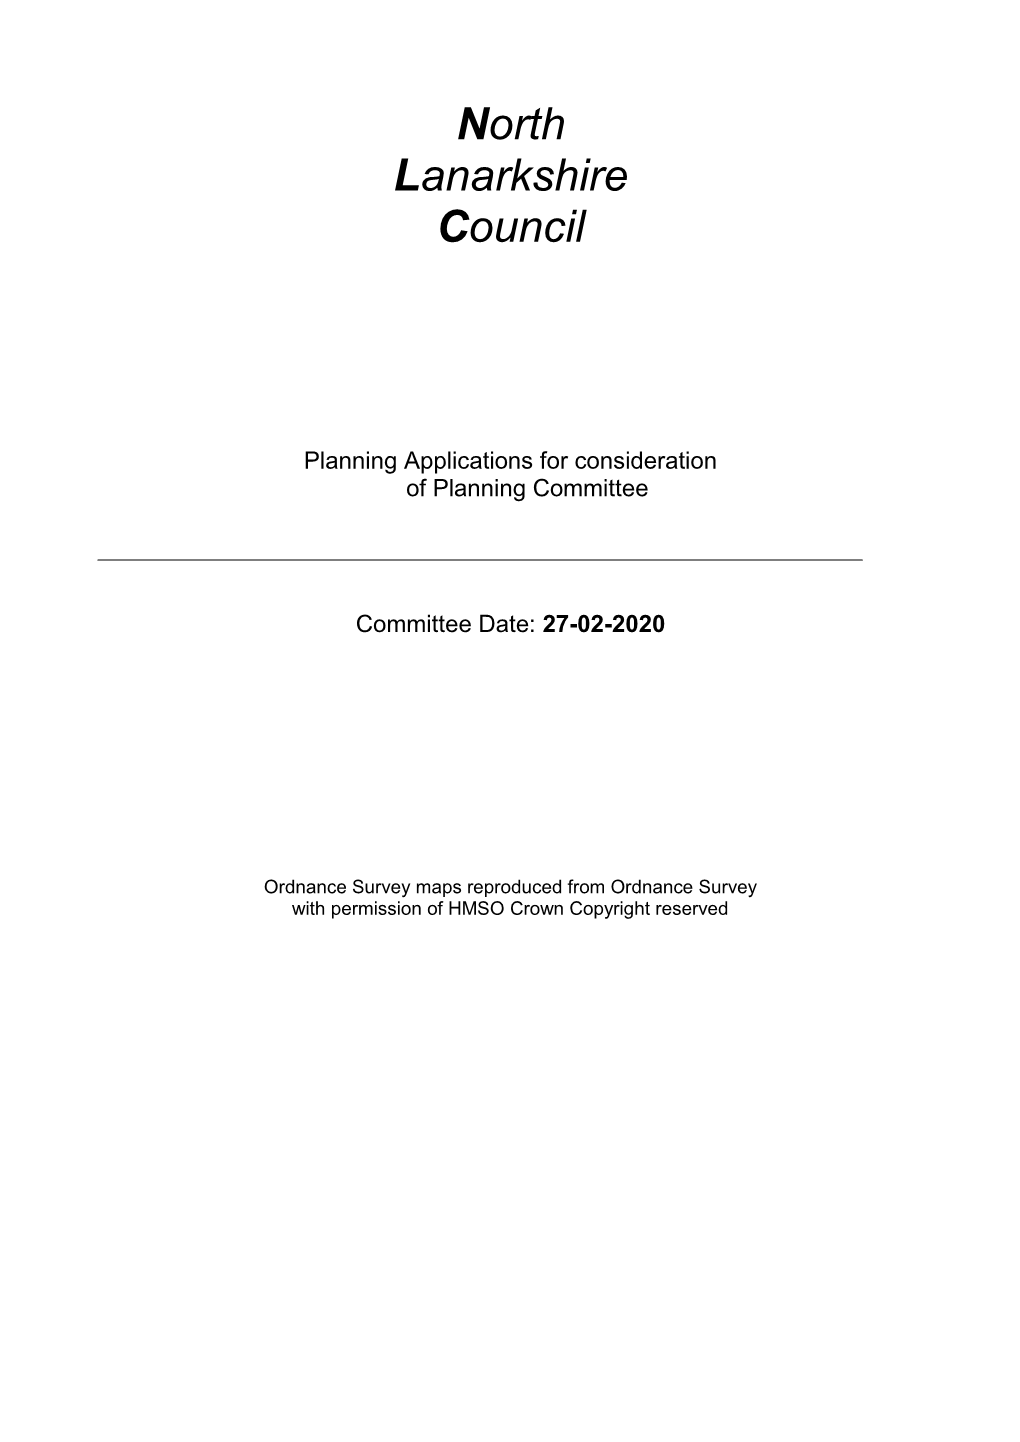 Applications for Planning and Development Committee